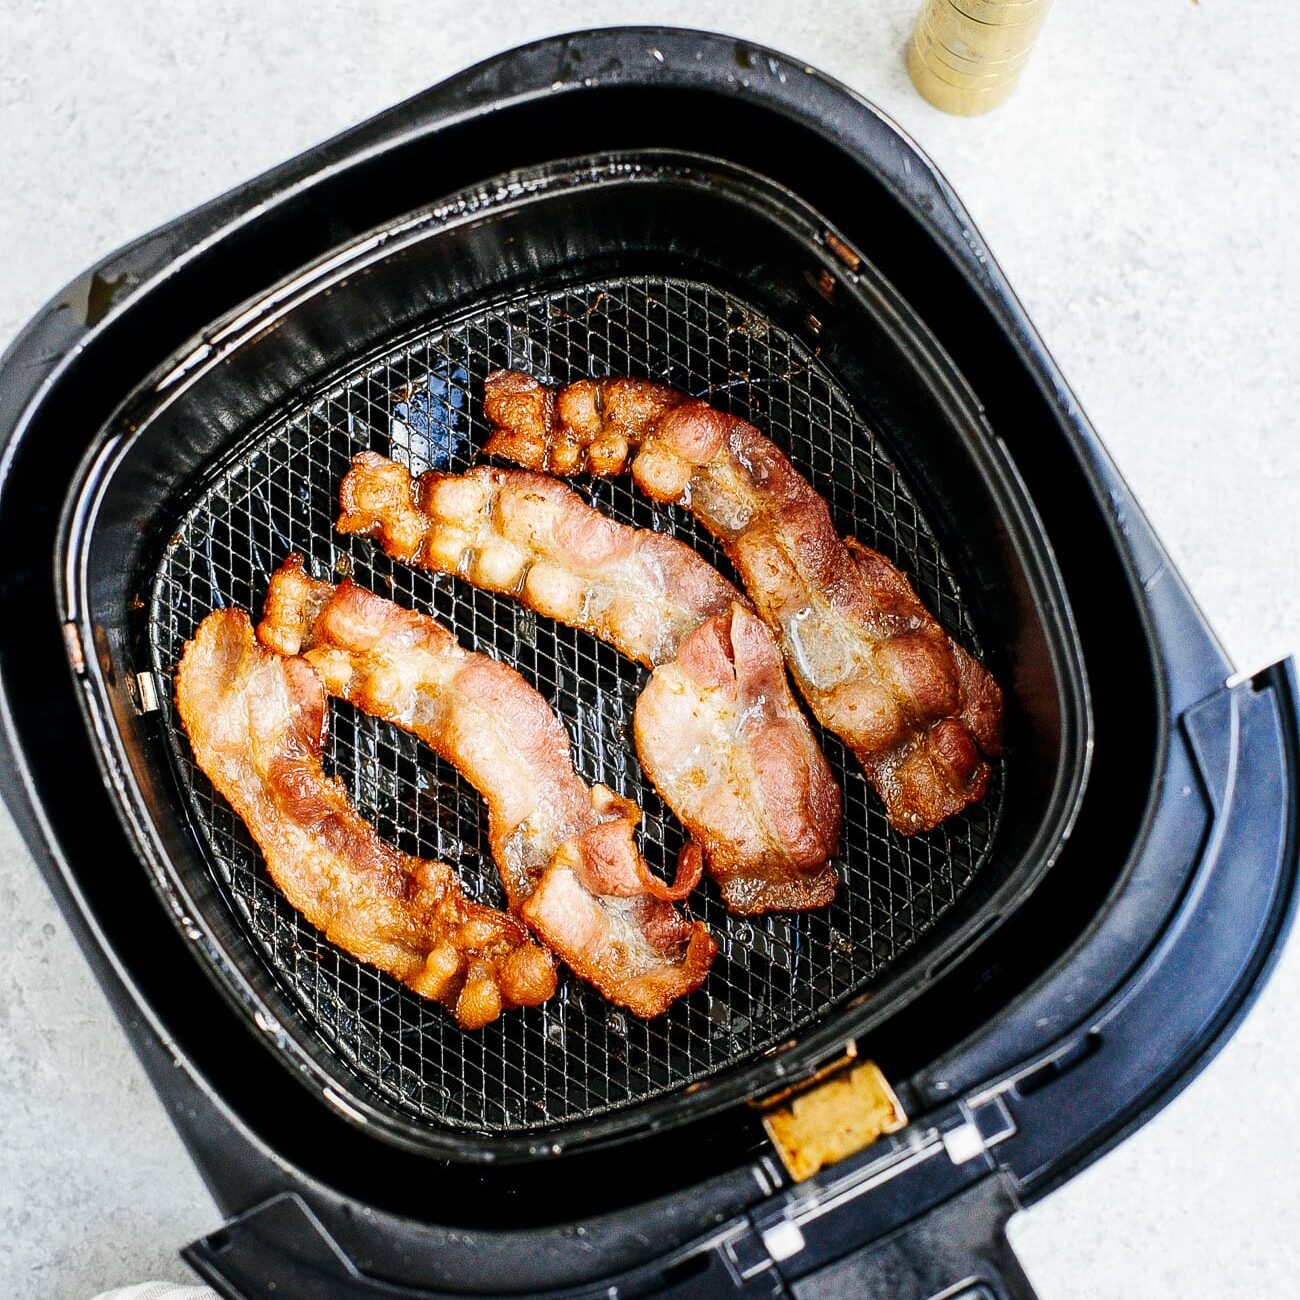 Overhead view of cooked bacon inside of a air fryer basket.